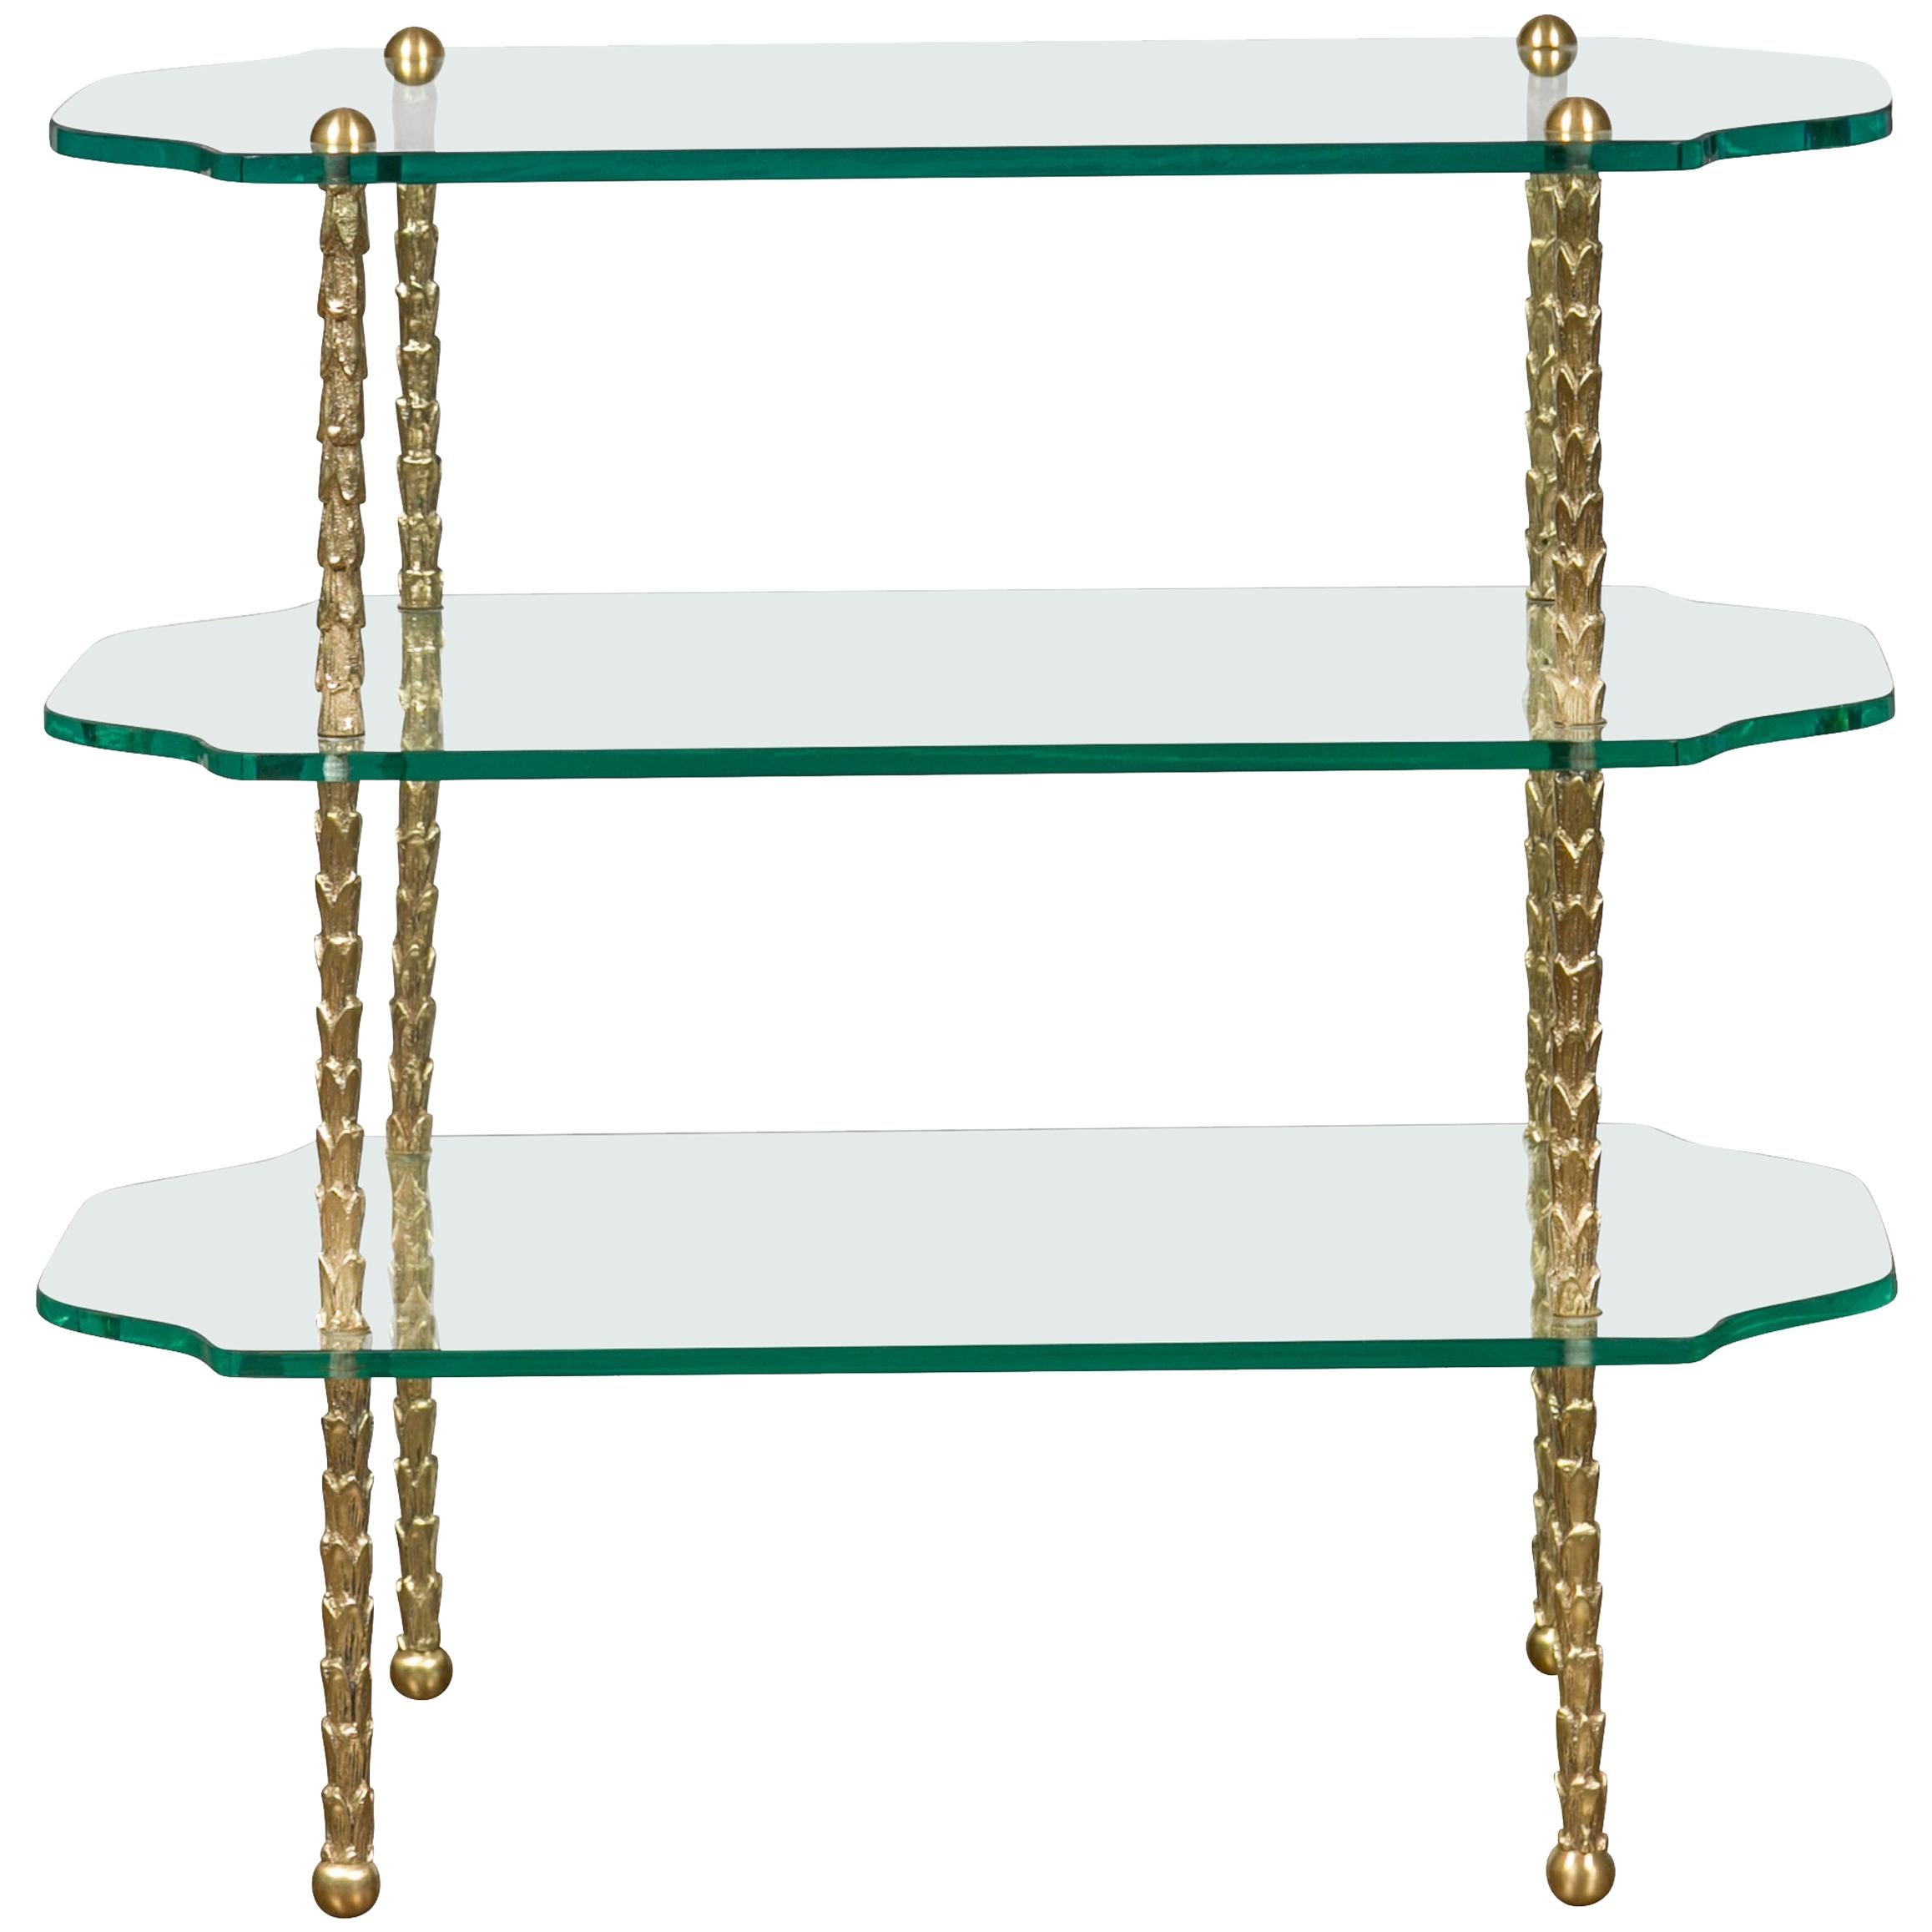 Midcentury Brass Three-Tiered Table with Glass Shelves and Foliage Motifs